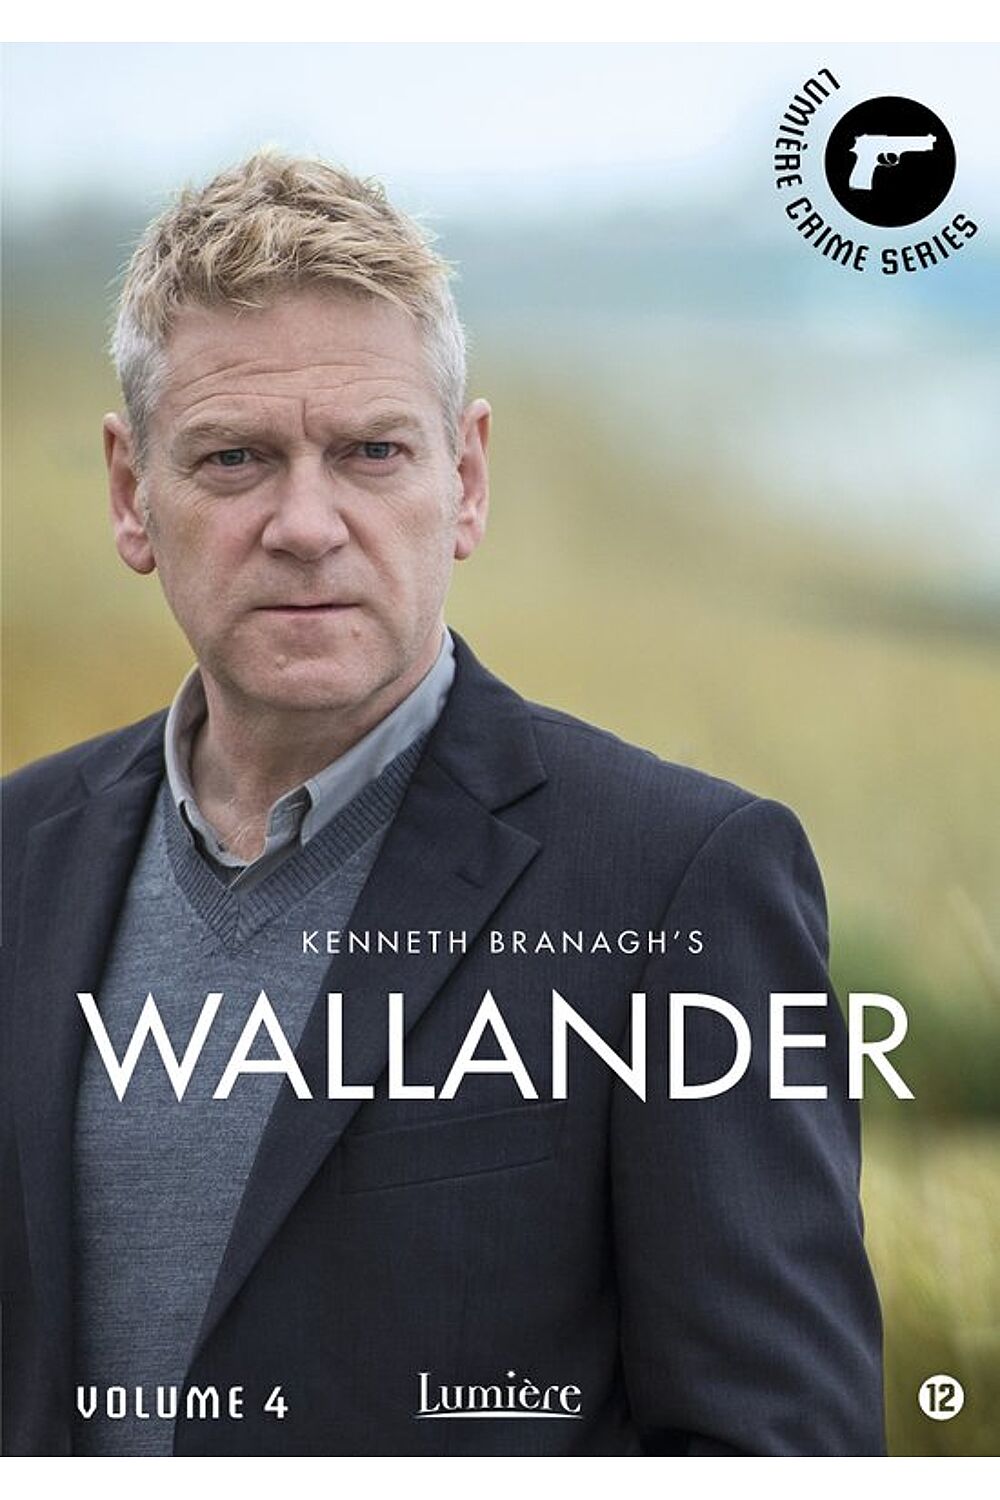 73 List Author Of Wallander Books from Famous authors